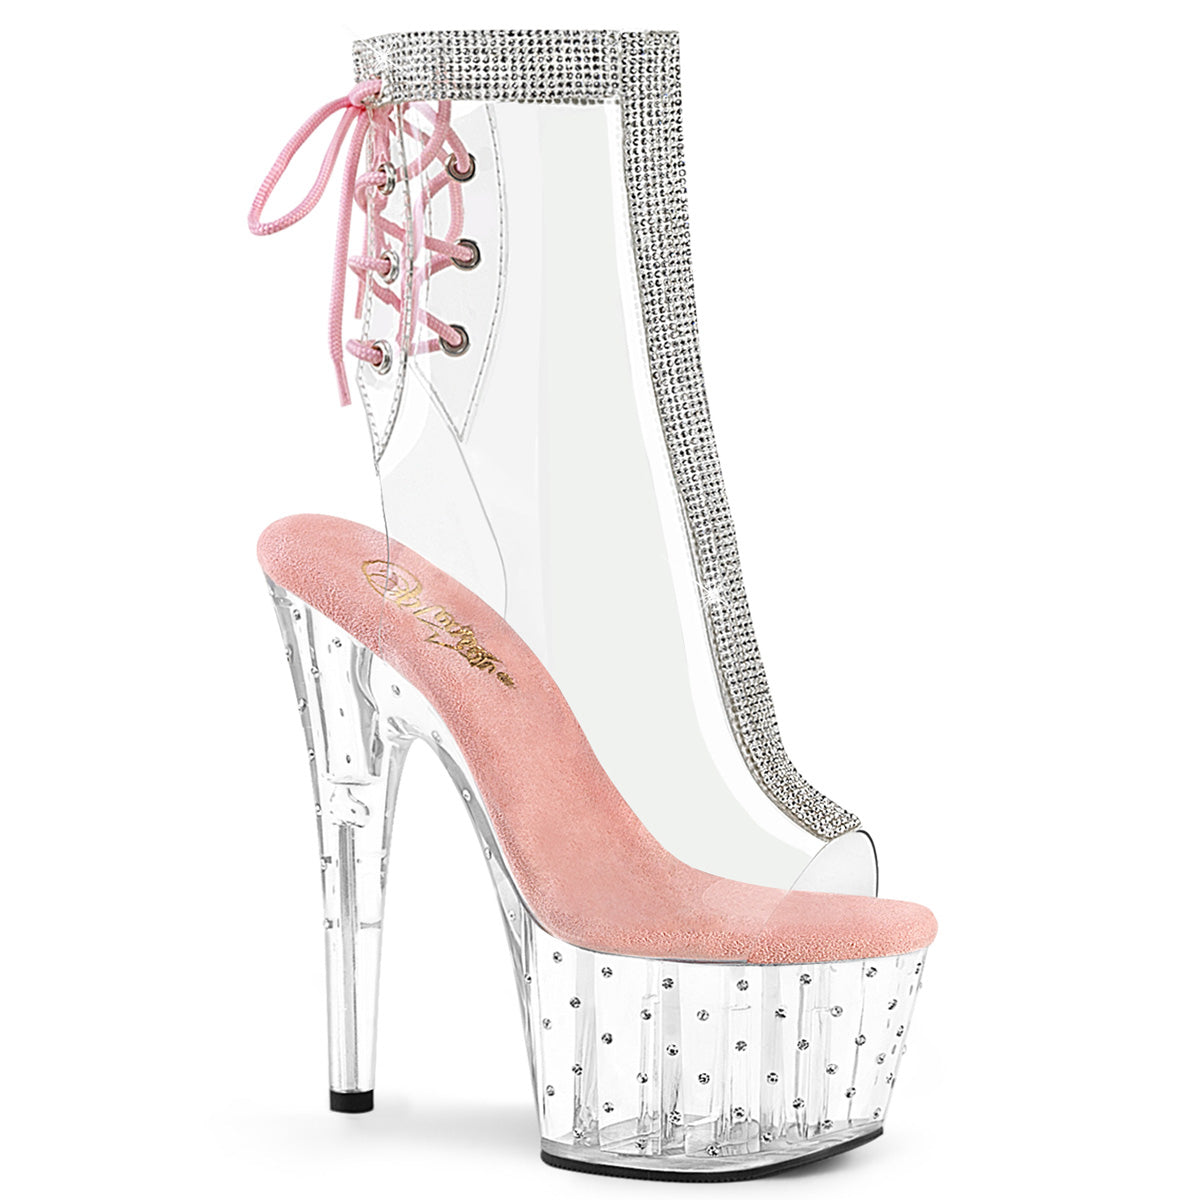 Pleaser STARDUST-1018C-2RS Clear-Baby Pink 7 Inch Heel, 2 3/4 Inch Platform Open Toe/Heel Ankle Boot With Rhinestone